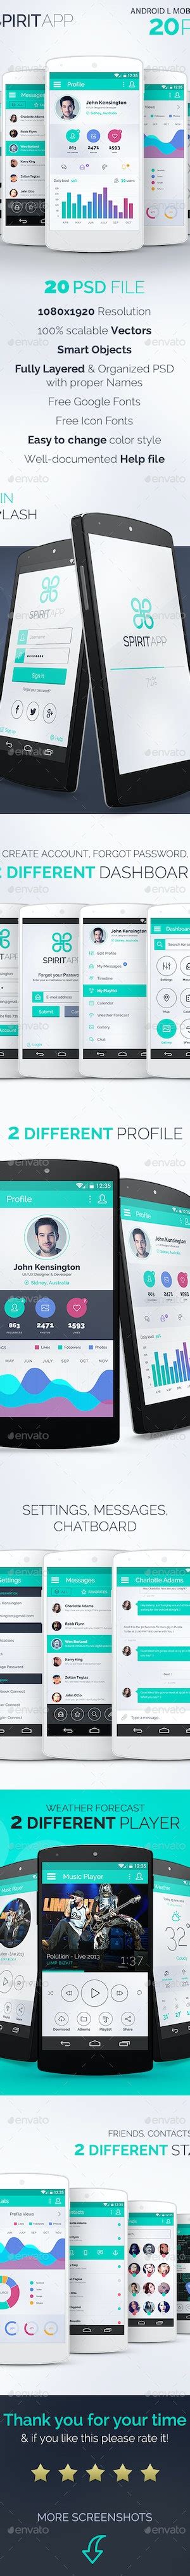 Spiritapp White Android Mobile Design Ui Kit By Creakits Graphicriver